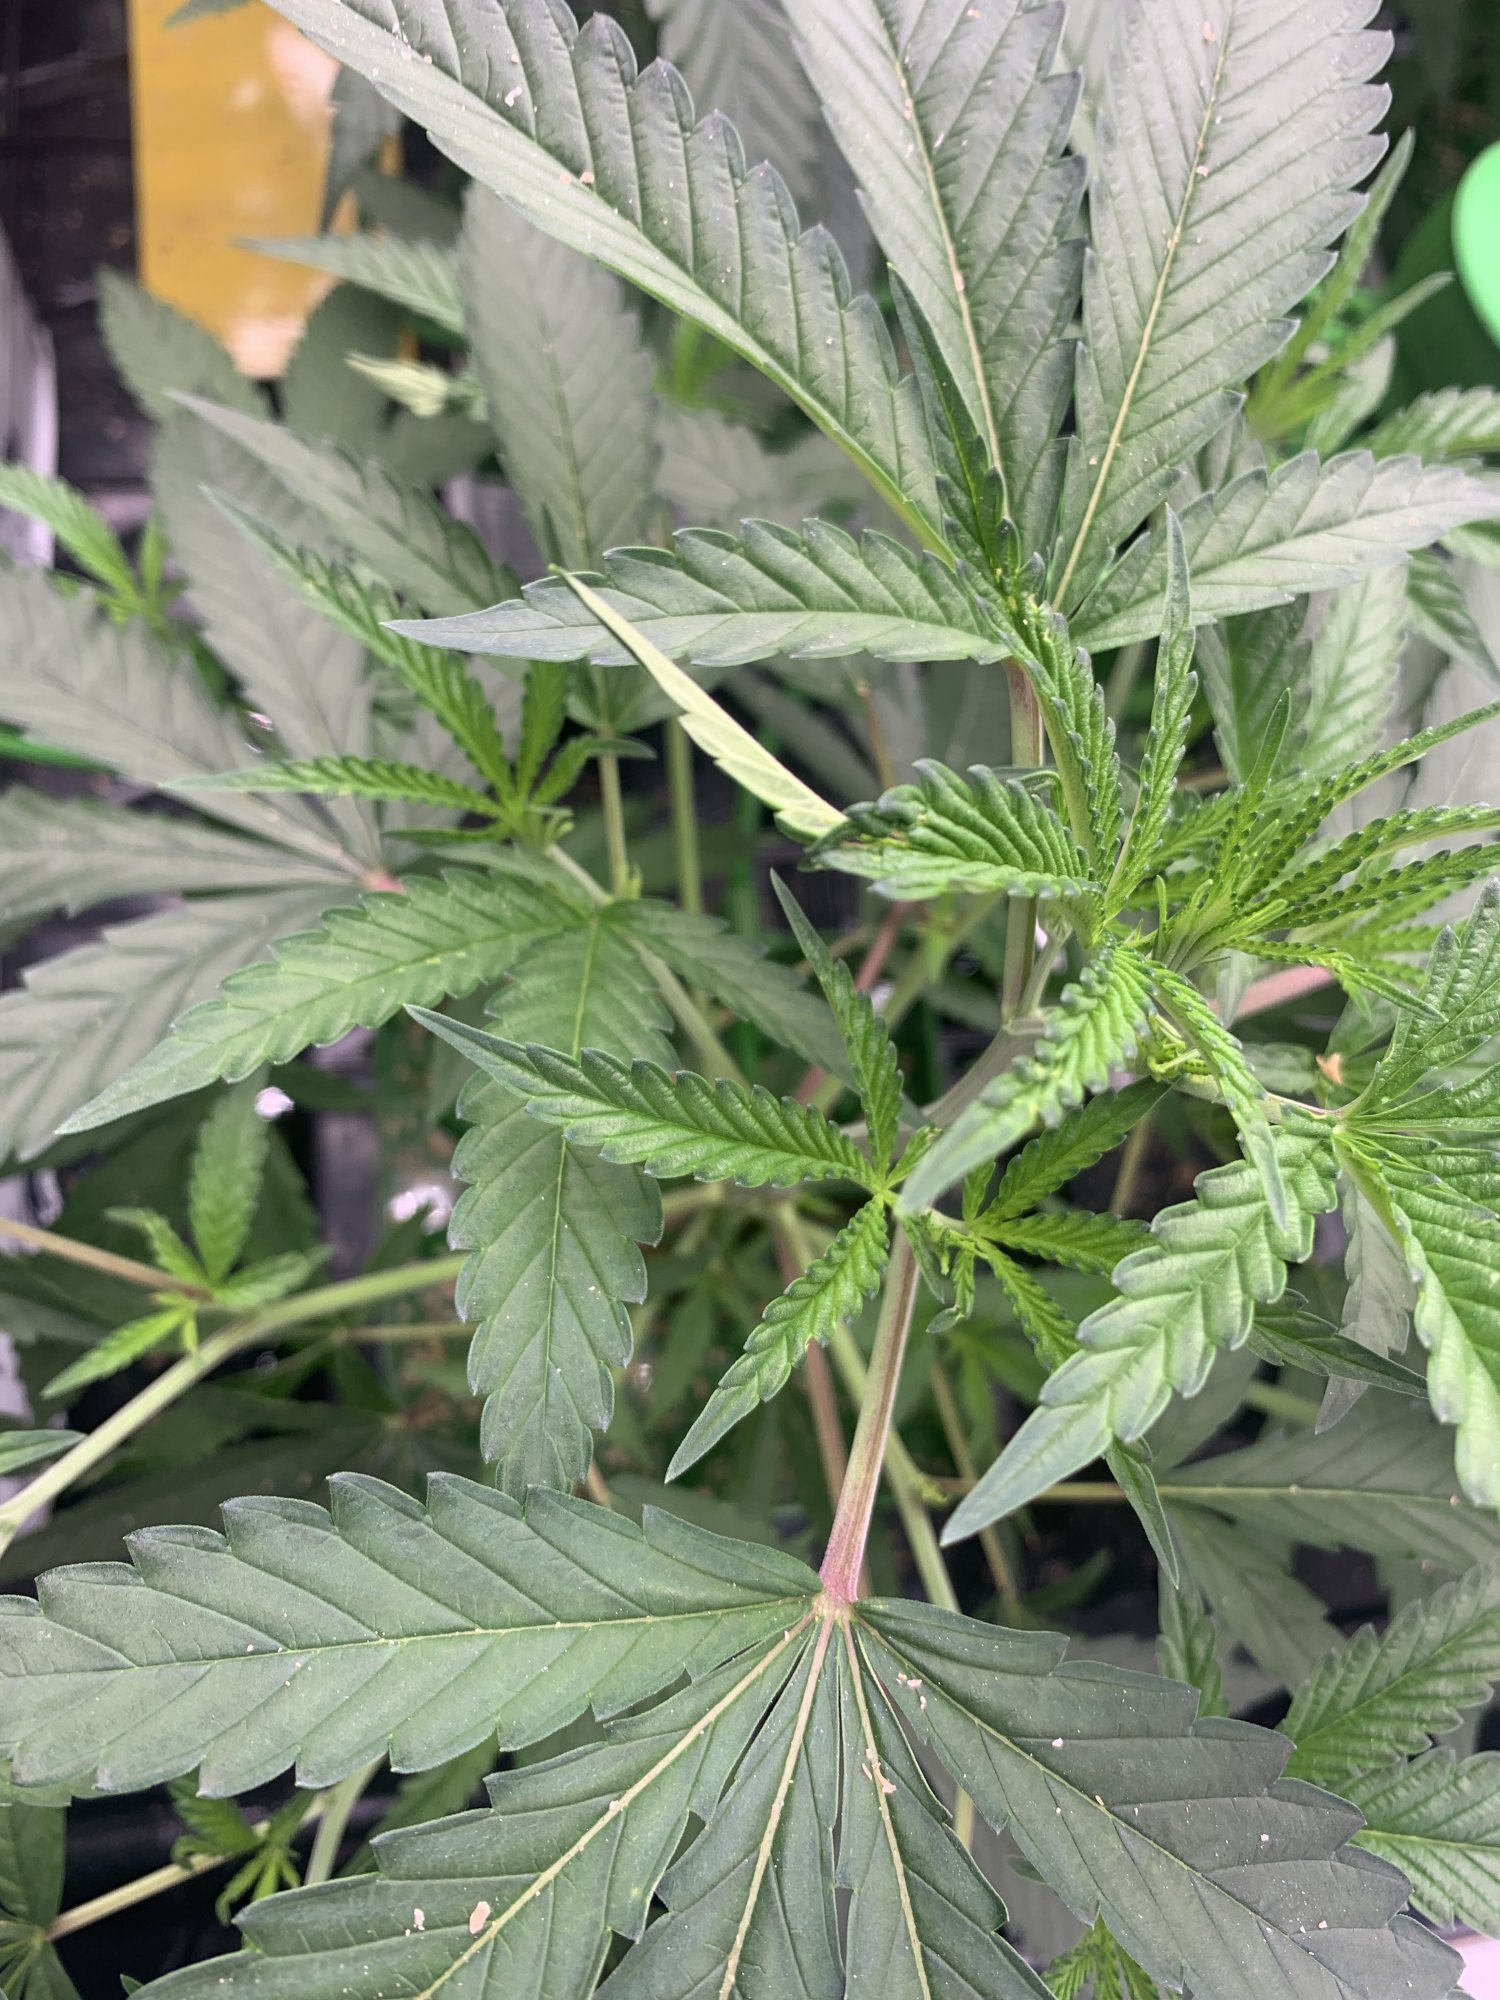 Help leaves twisting with lesions and holes at area where its twisted